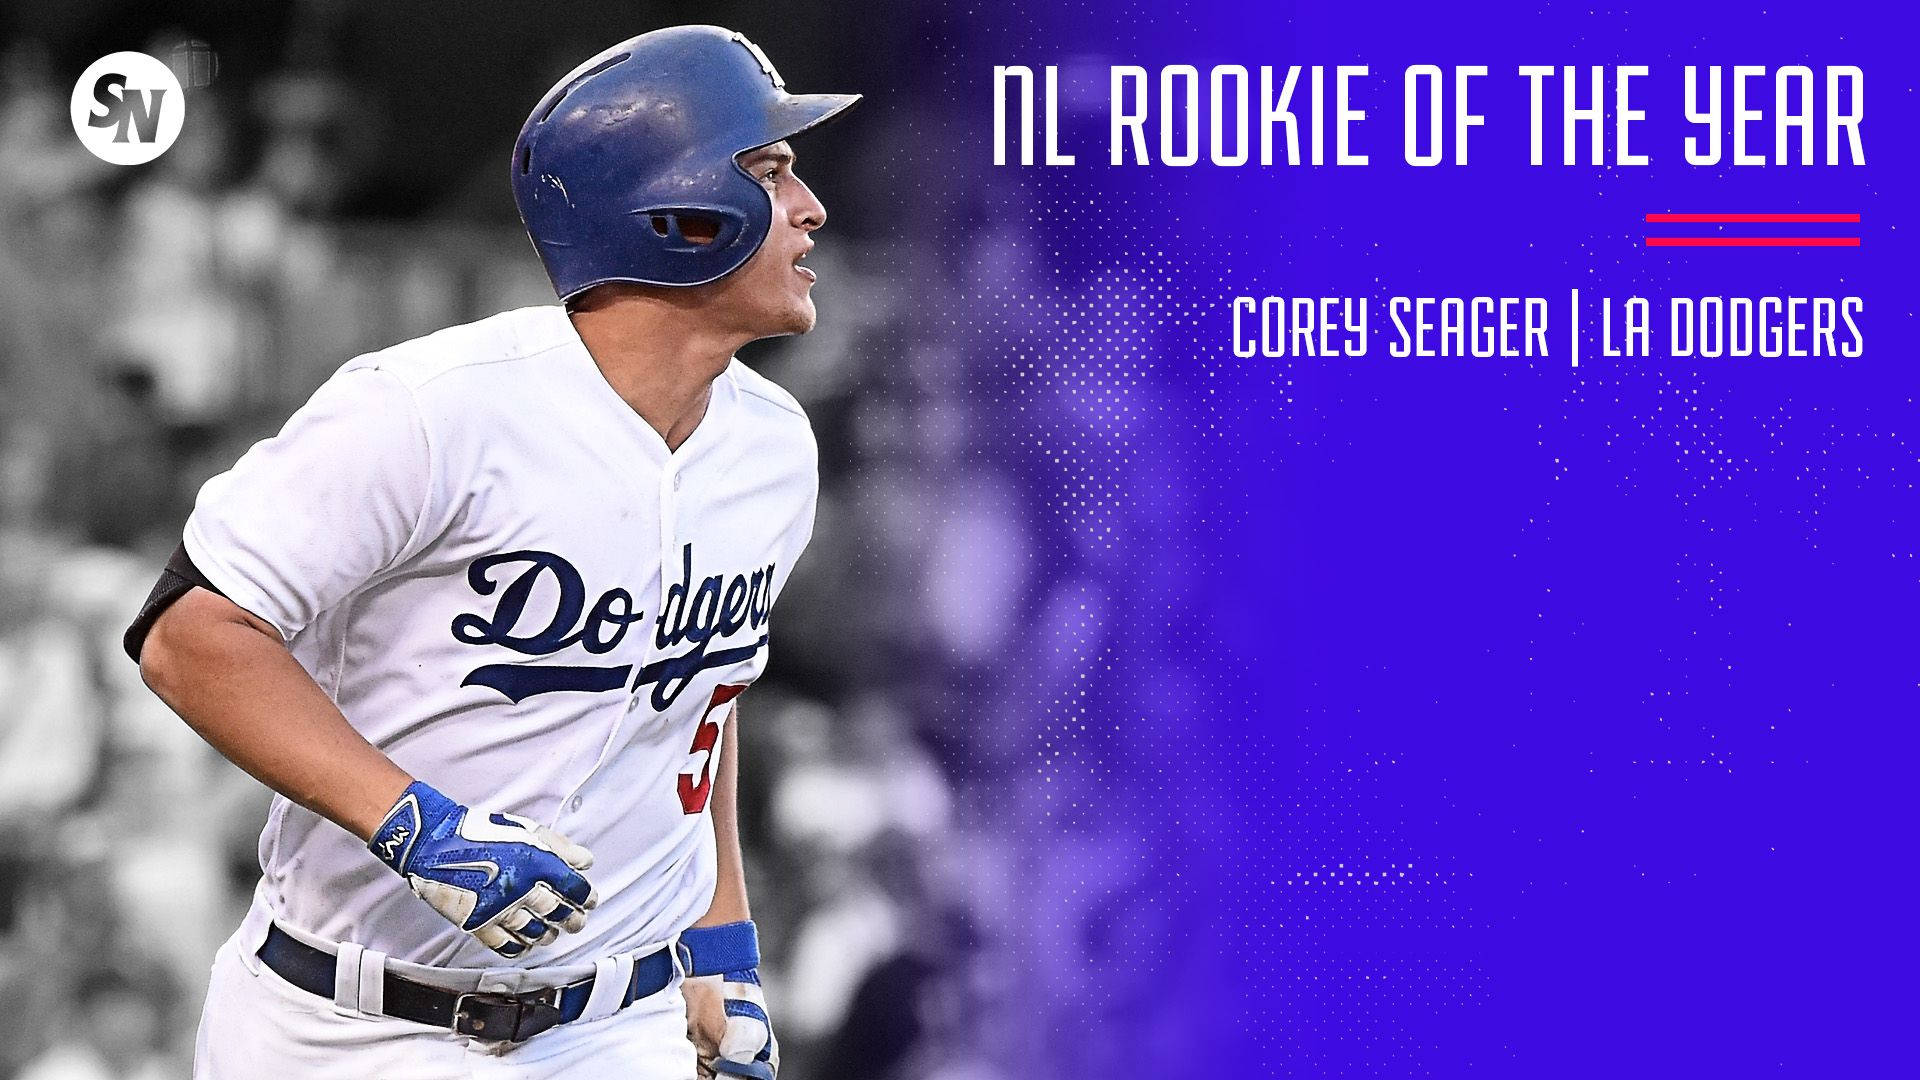 Corey Seager NL Rookie Of The Year Wallpaper